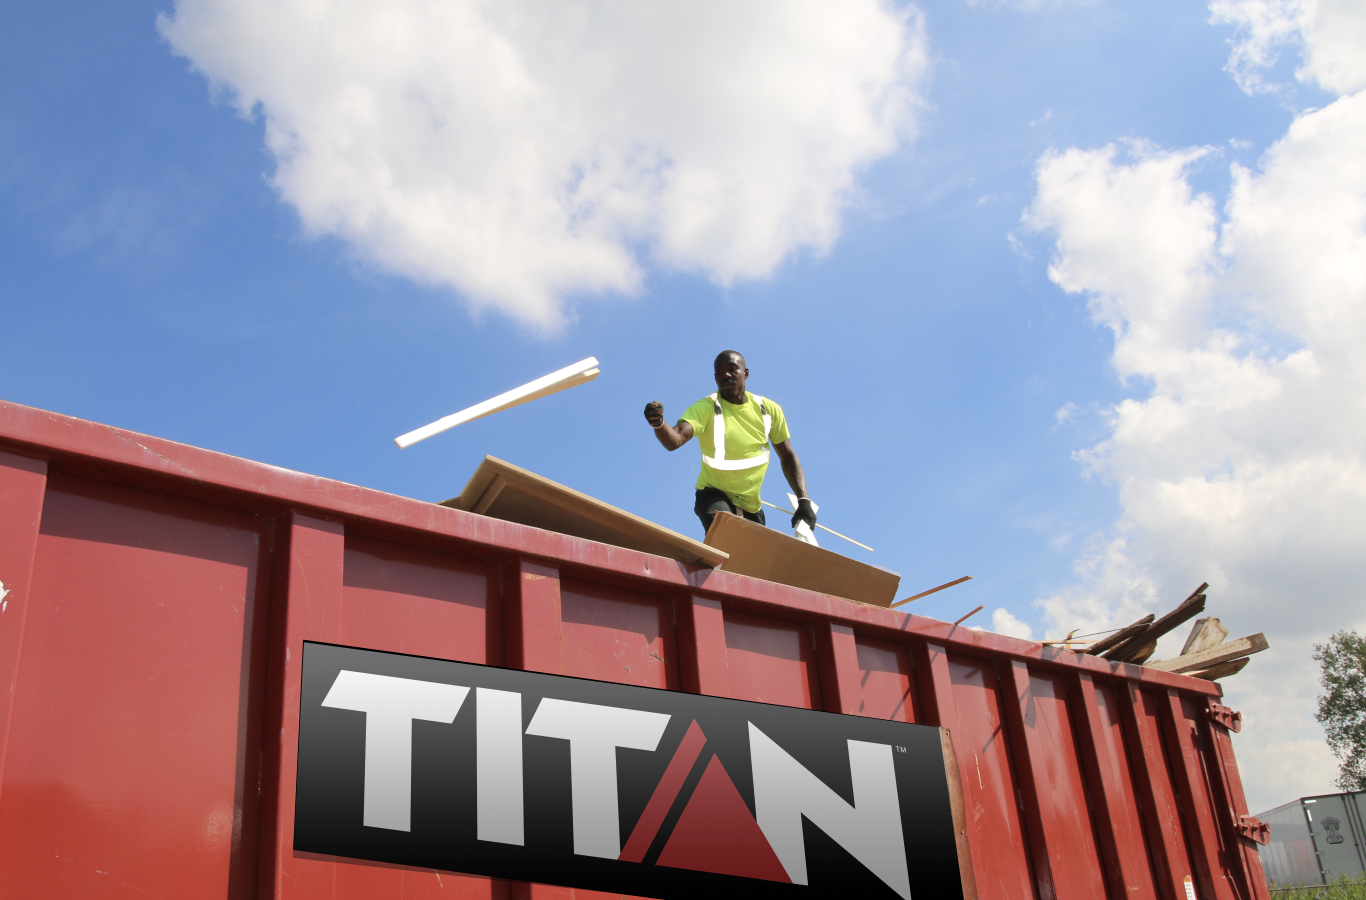 Titan Dumpster with man tossing waste in it.